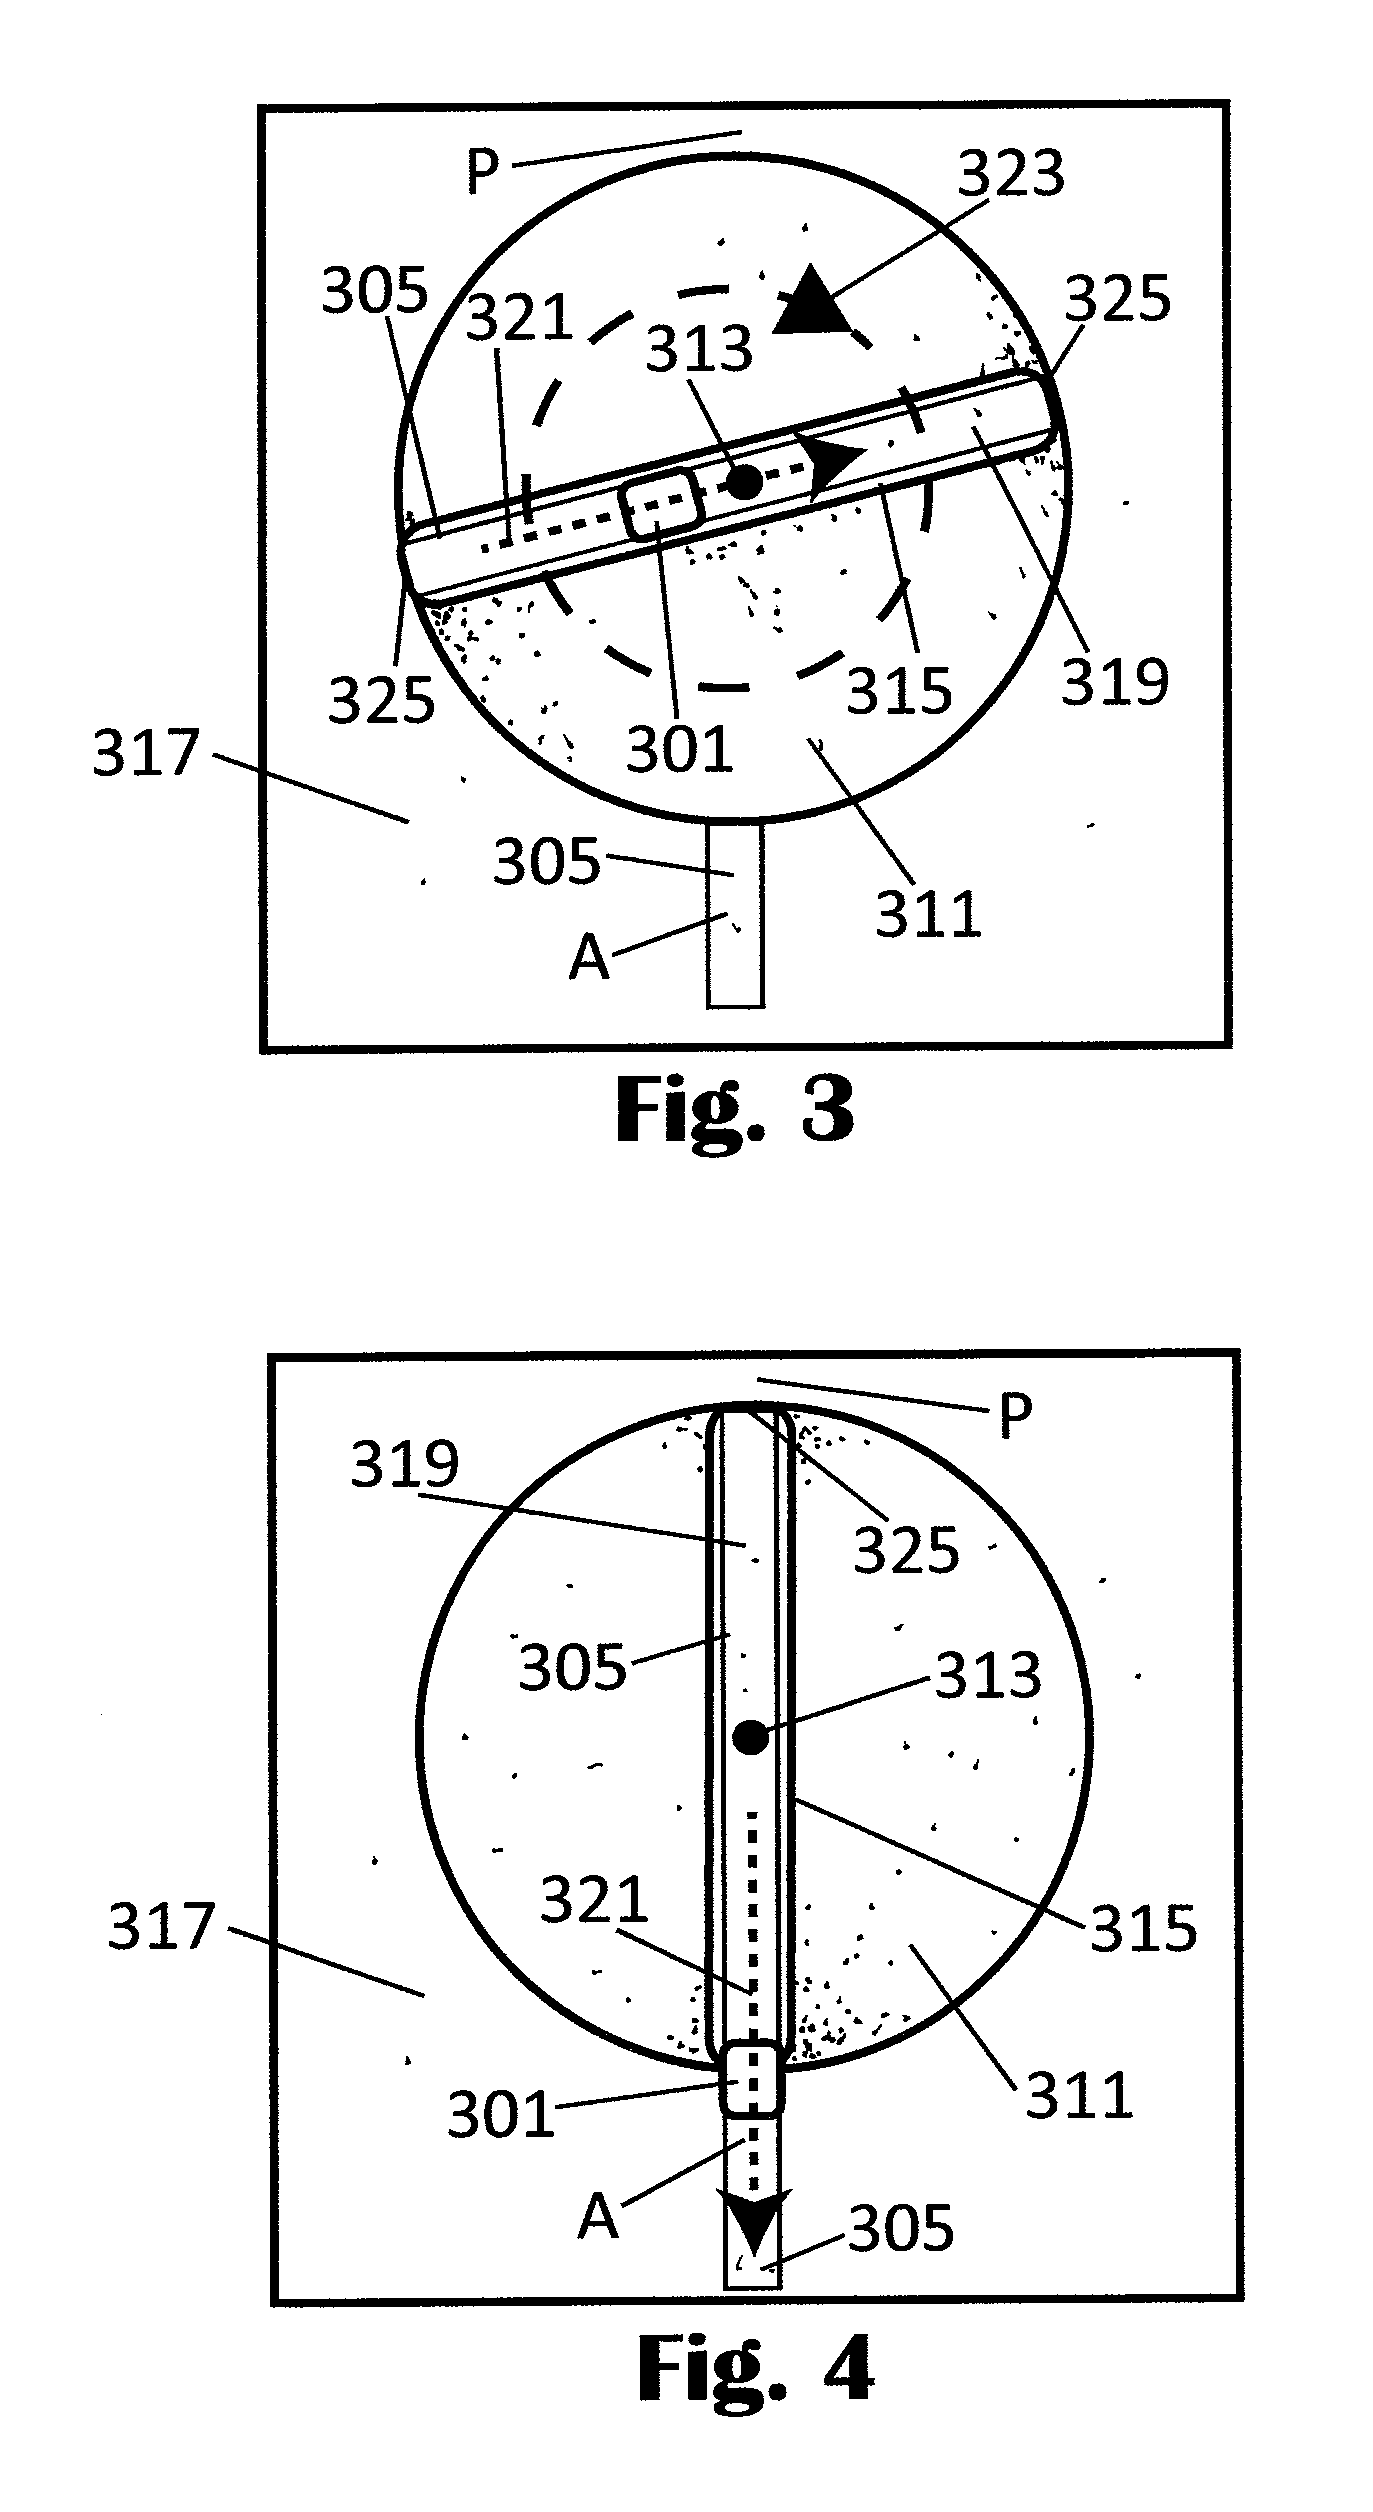 Motion ride method and apparatus for illusion of teleportation